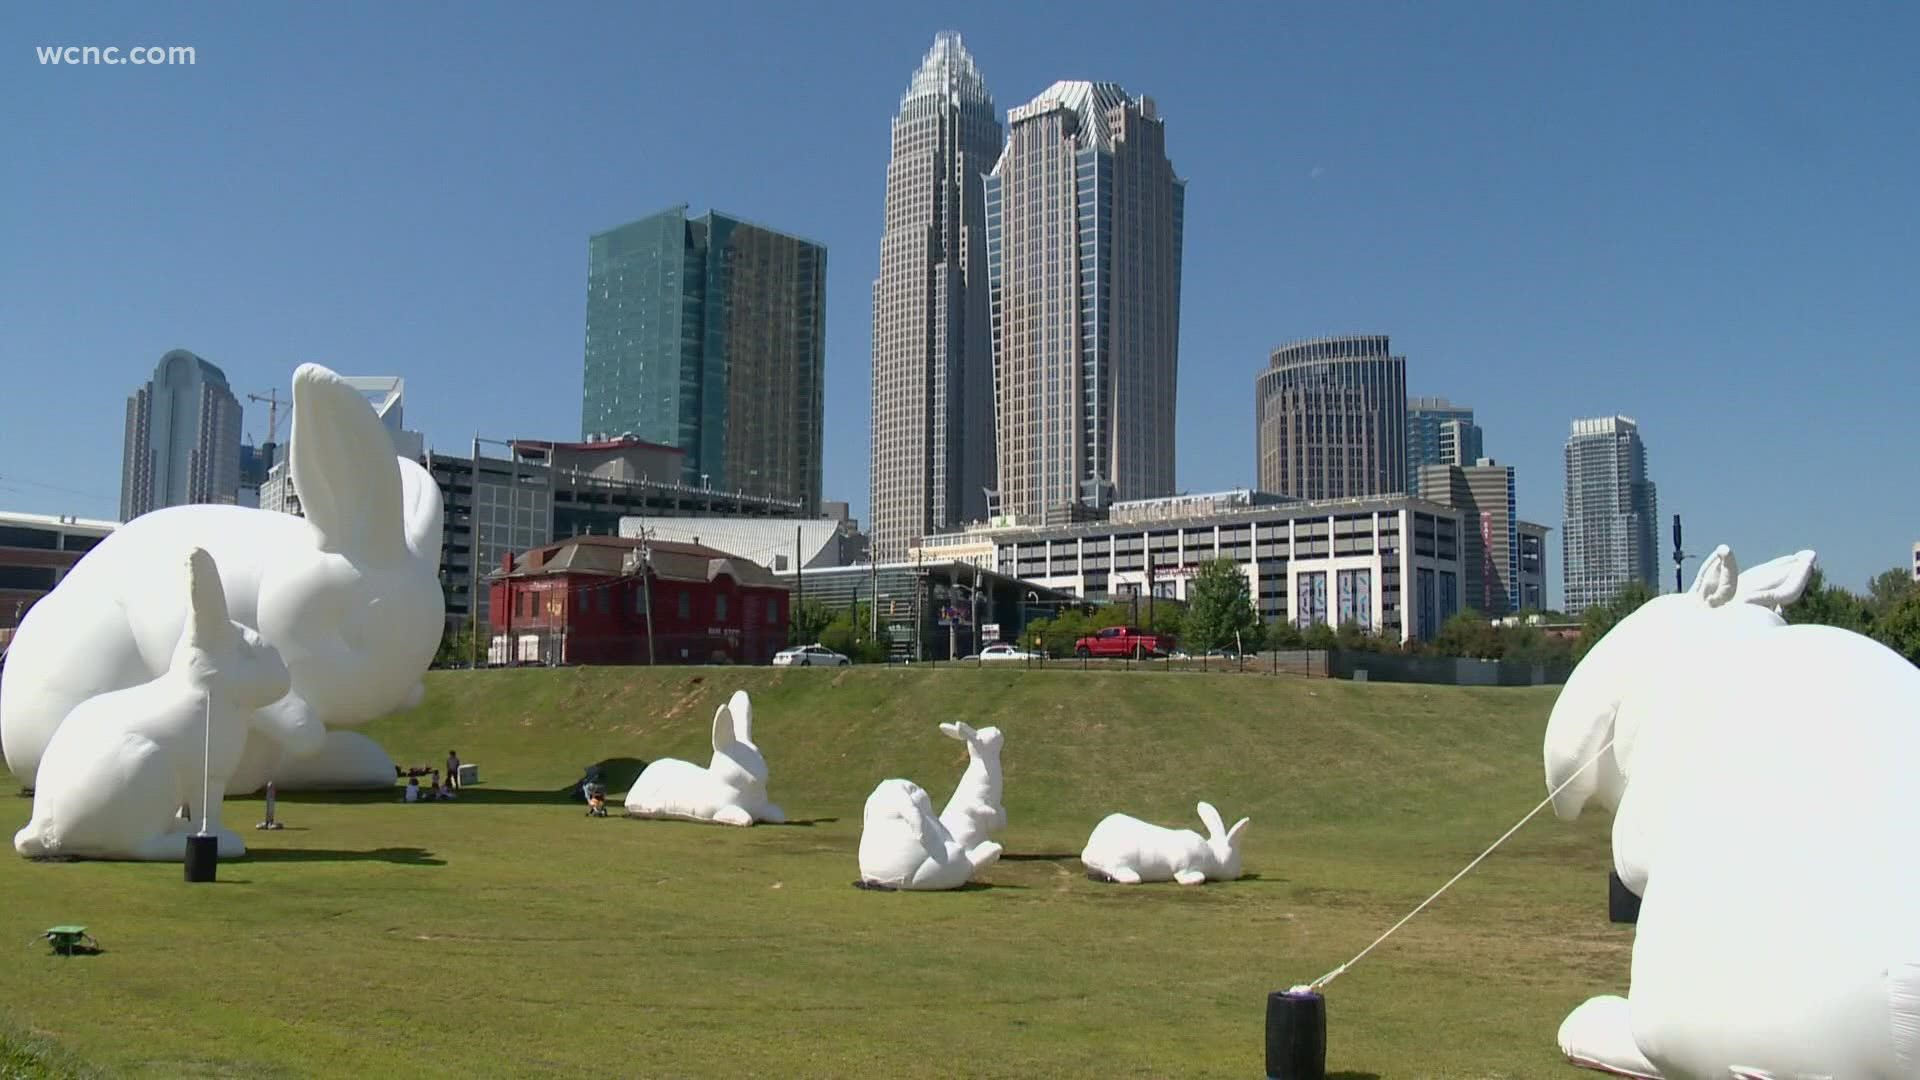 The bunnies are usually included in the annual Charlotte SHOUT! festival, which was canceled this year.